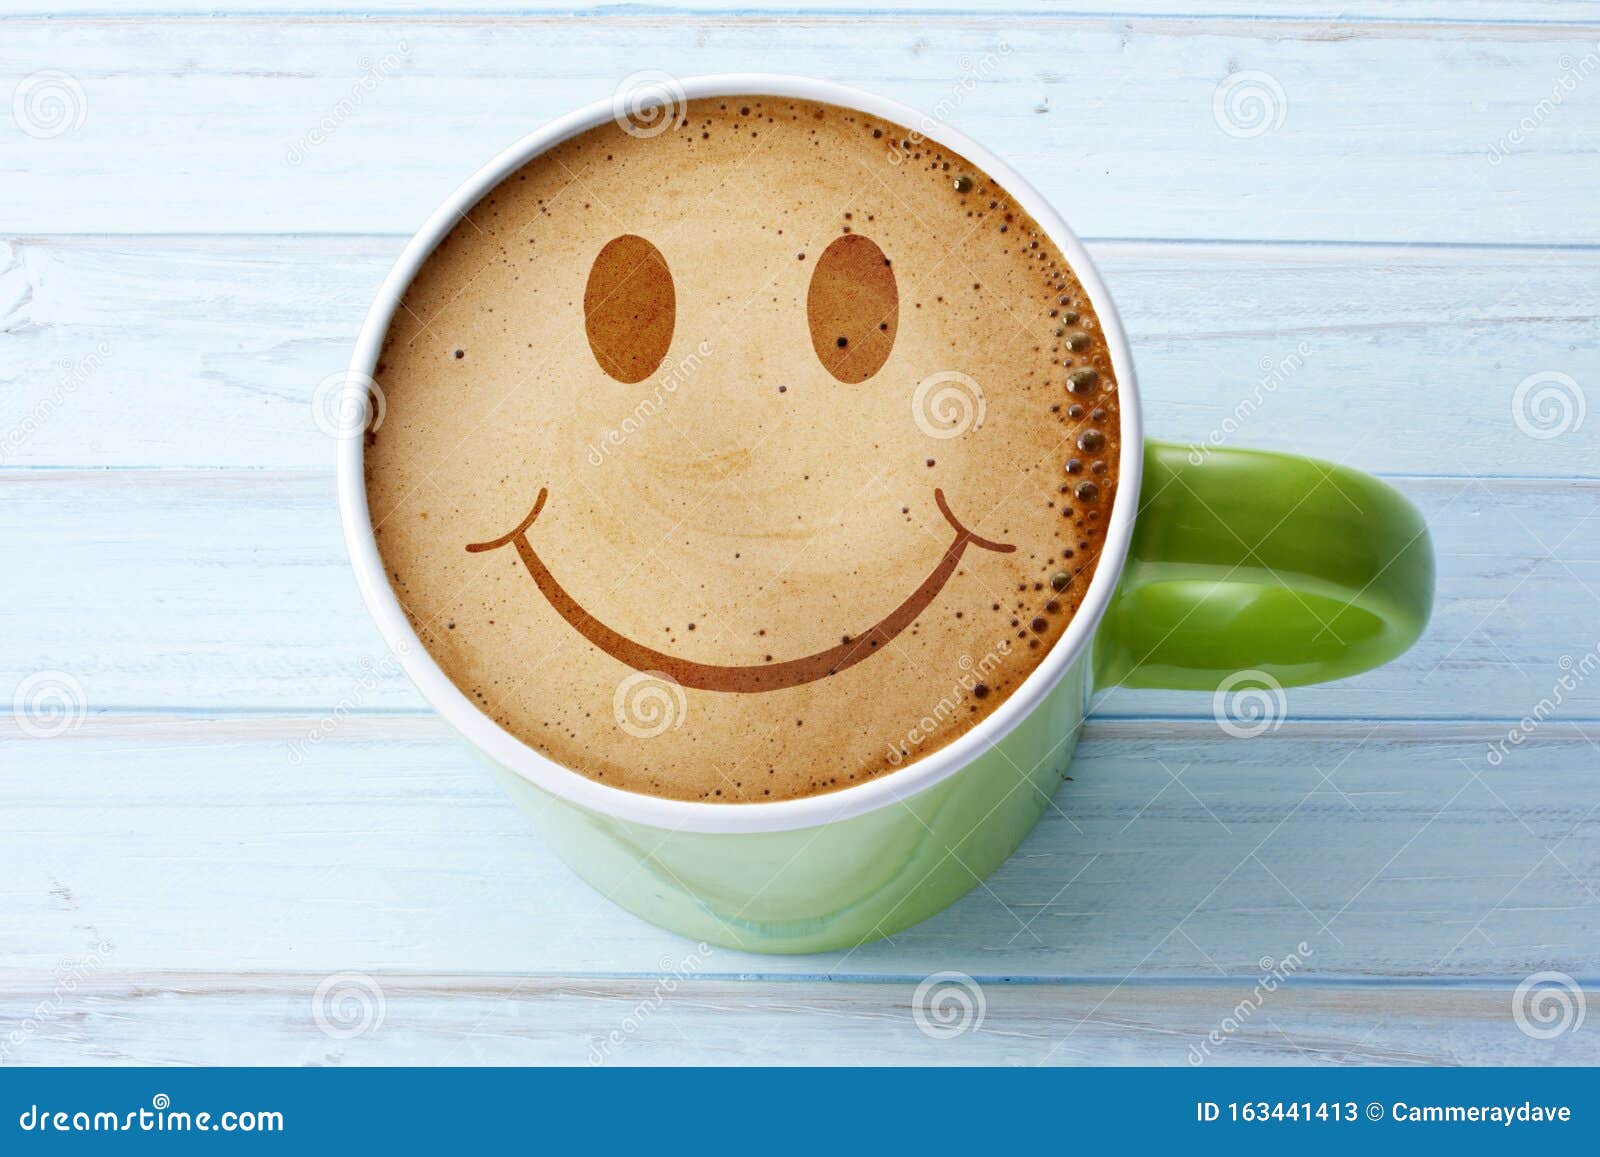 Happy Coffee Cup Smiley Face Stock Image - Image of pleasure ...